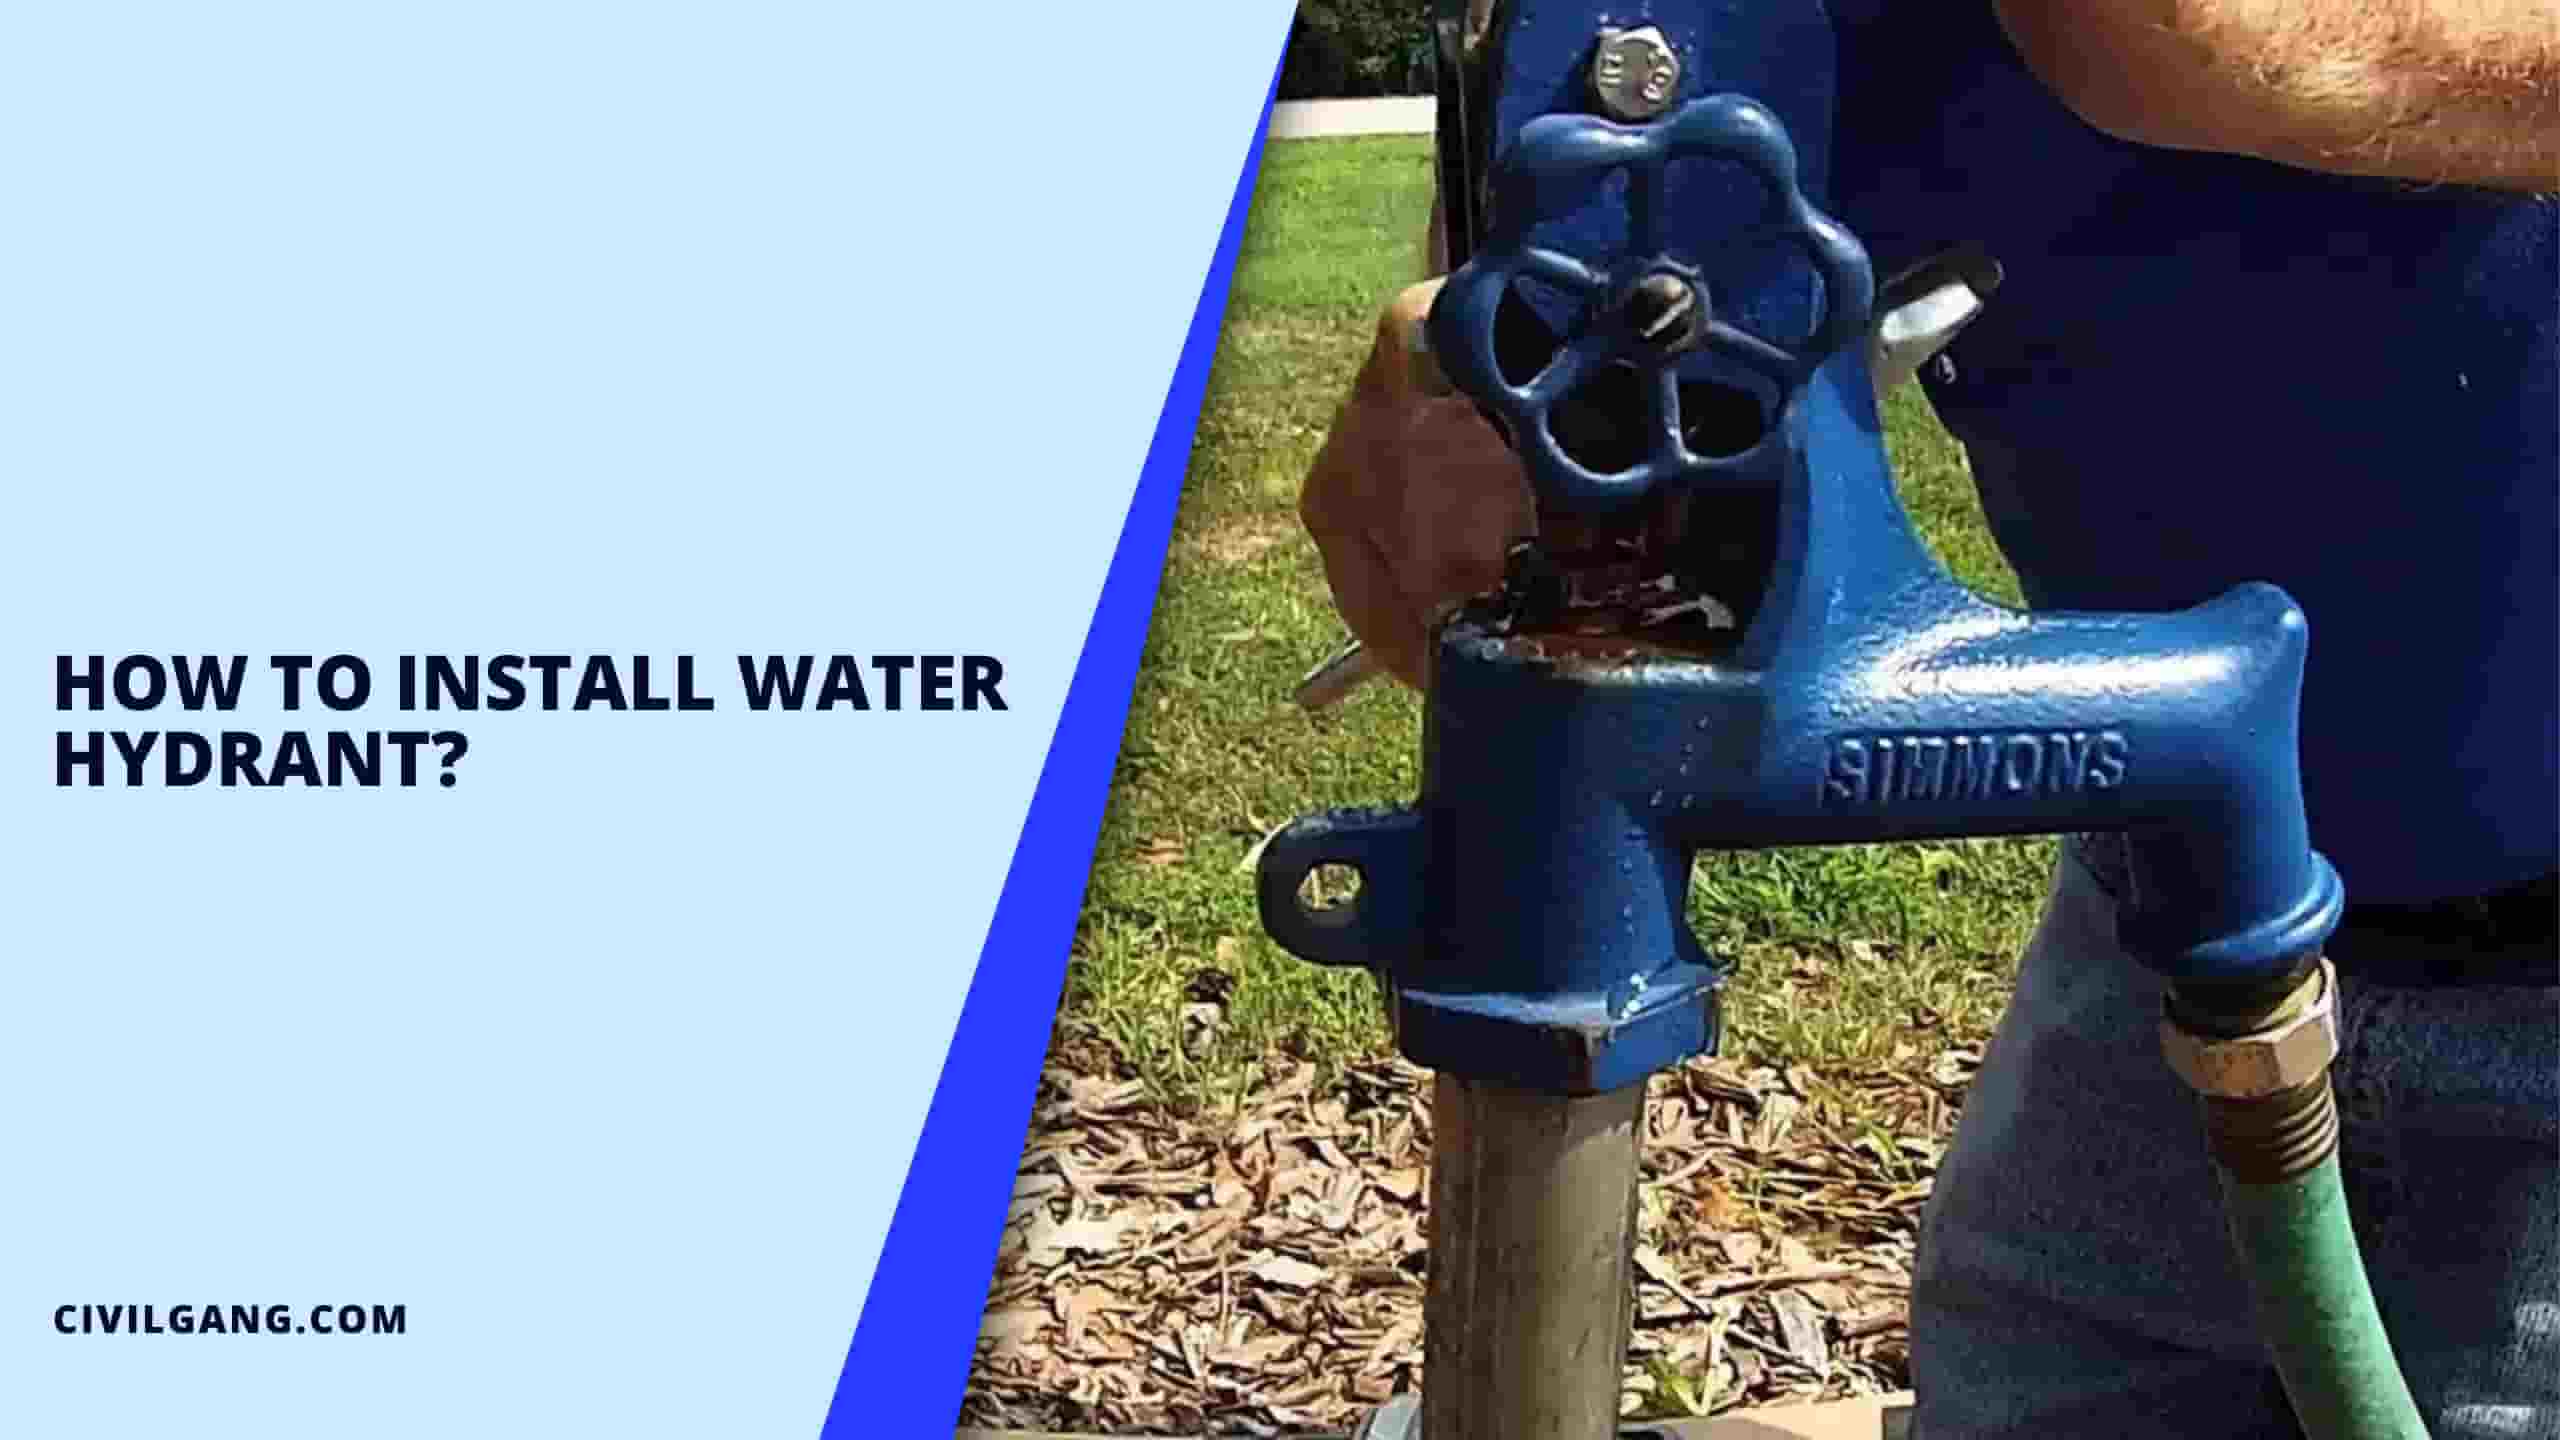 How to Install Water Hydrant